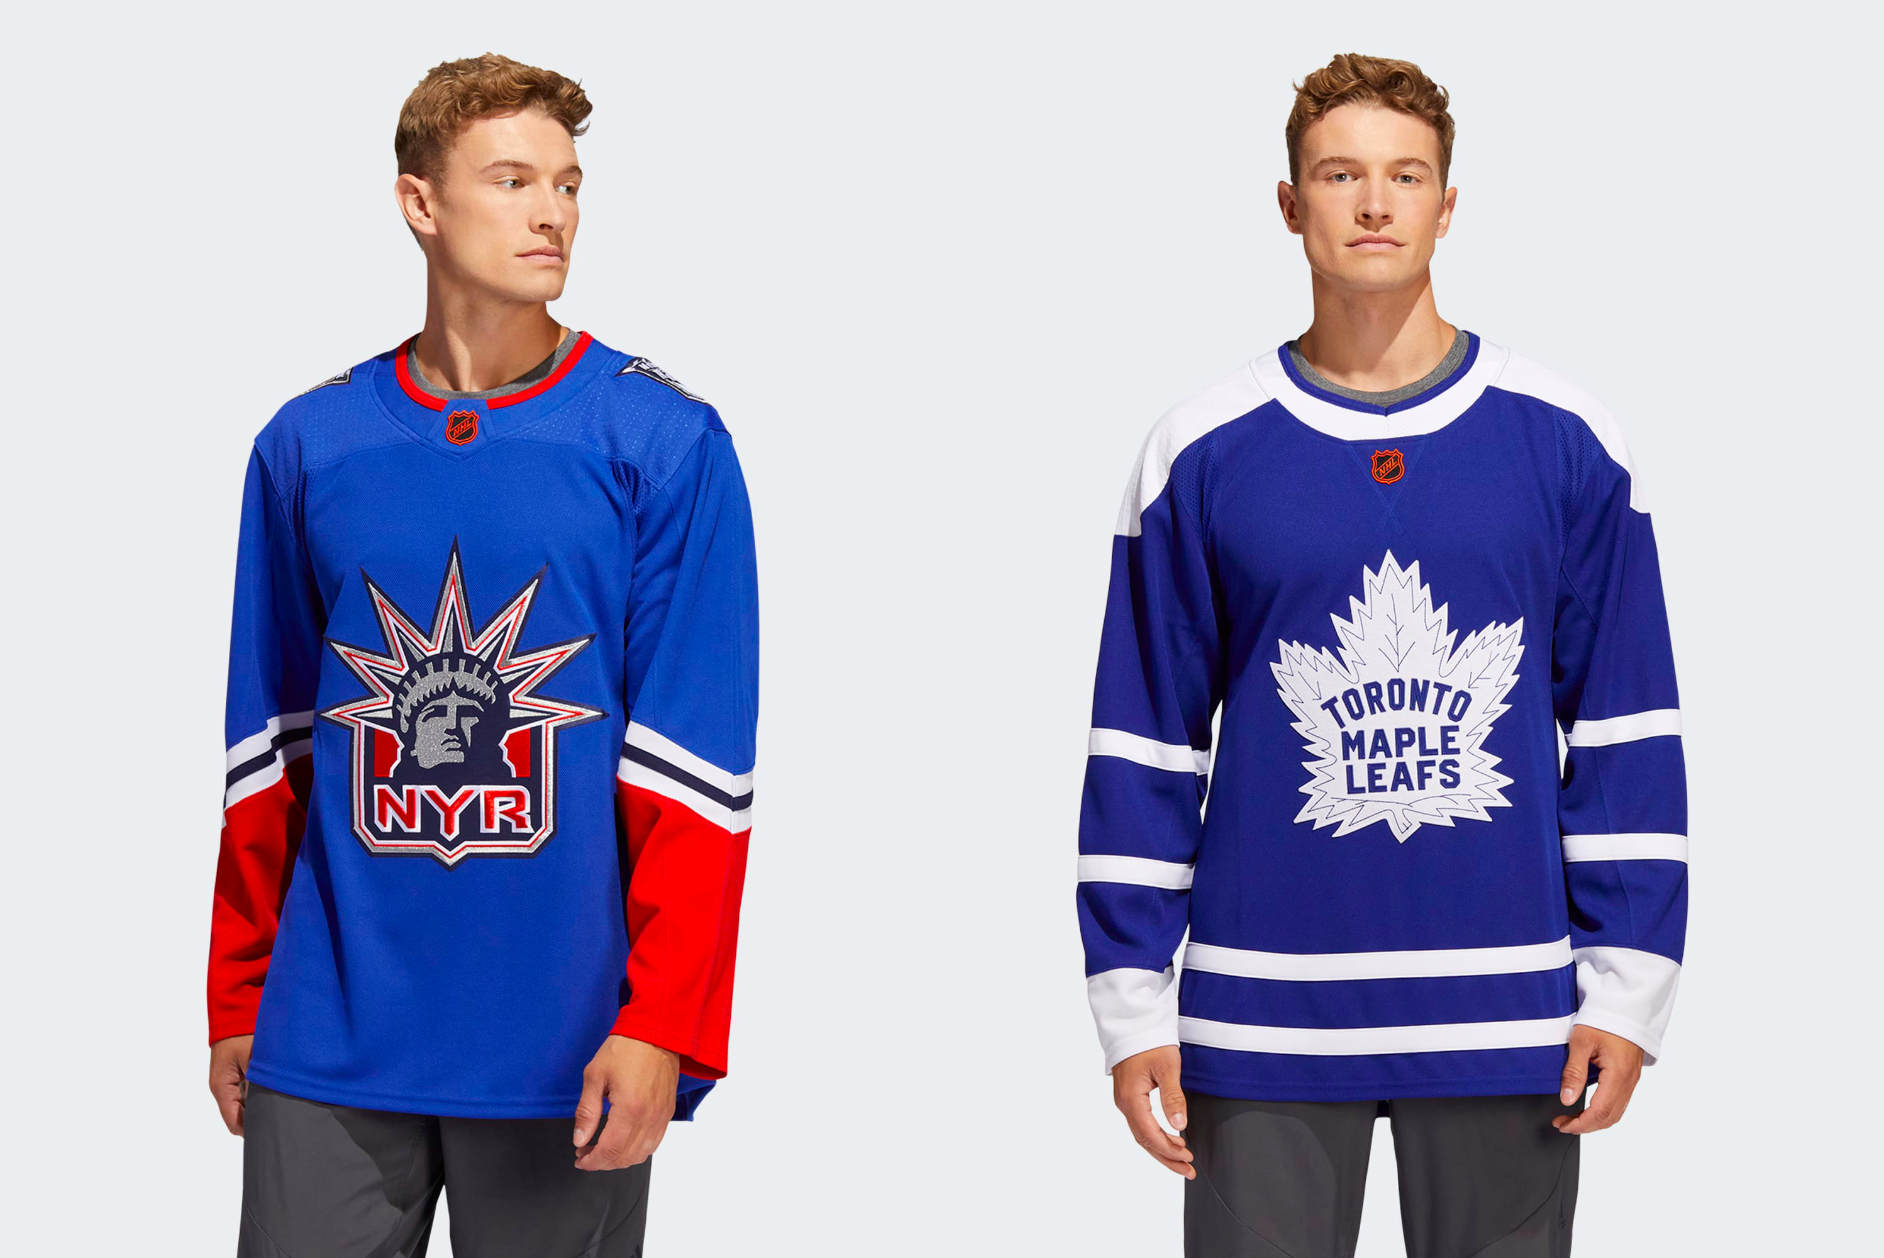 Check out the best new HS hockey jerseys in Jersey for 2022 